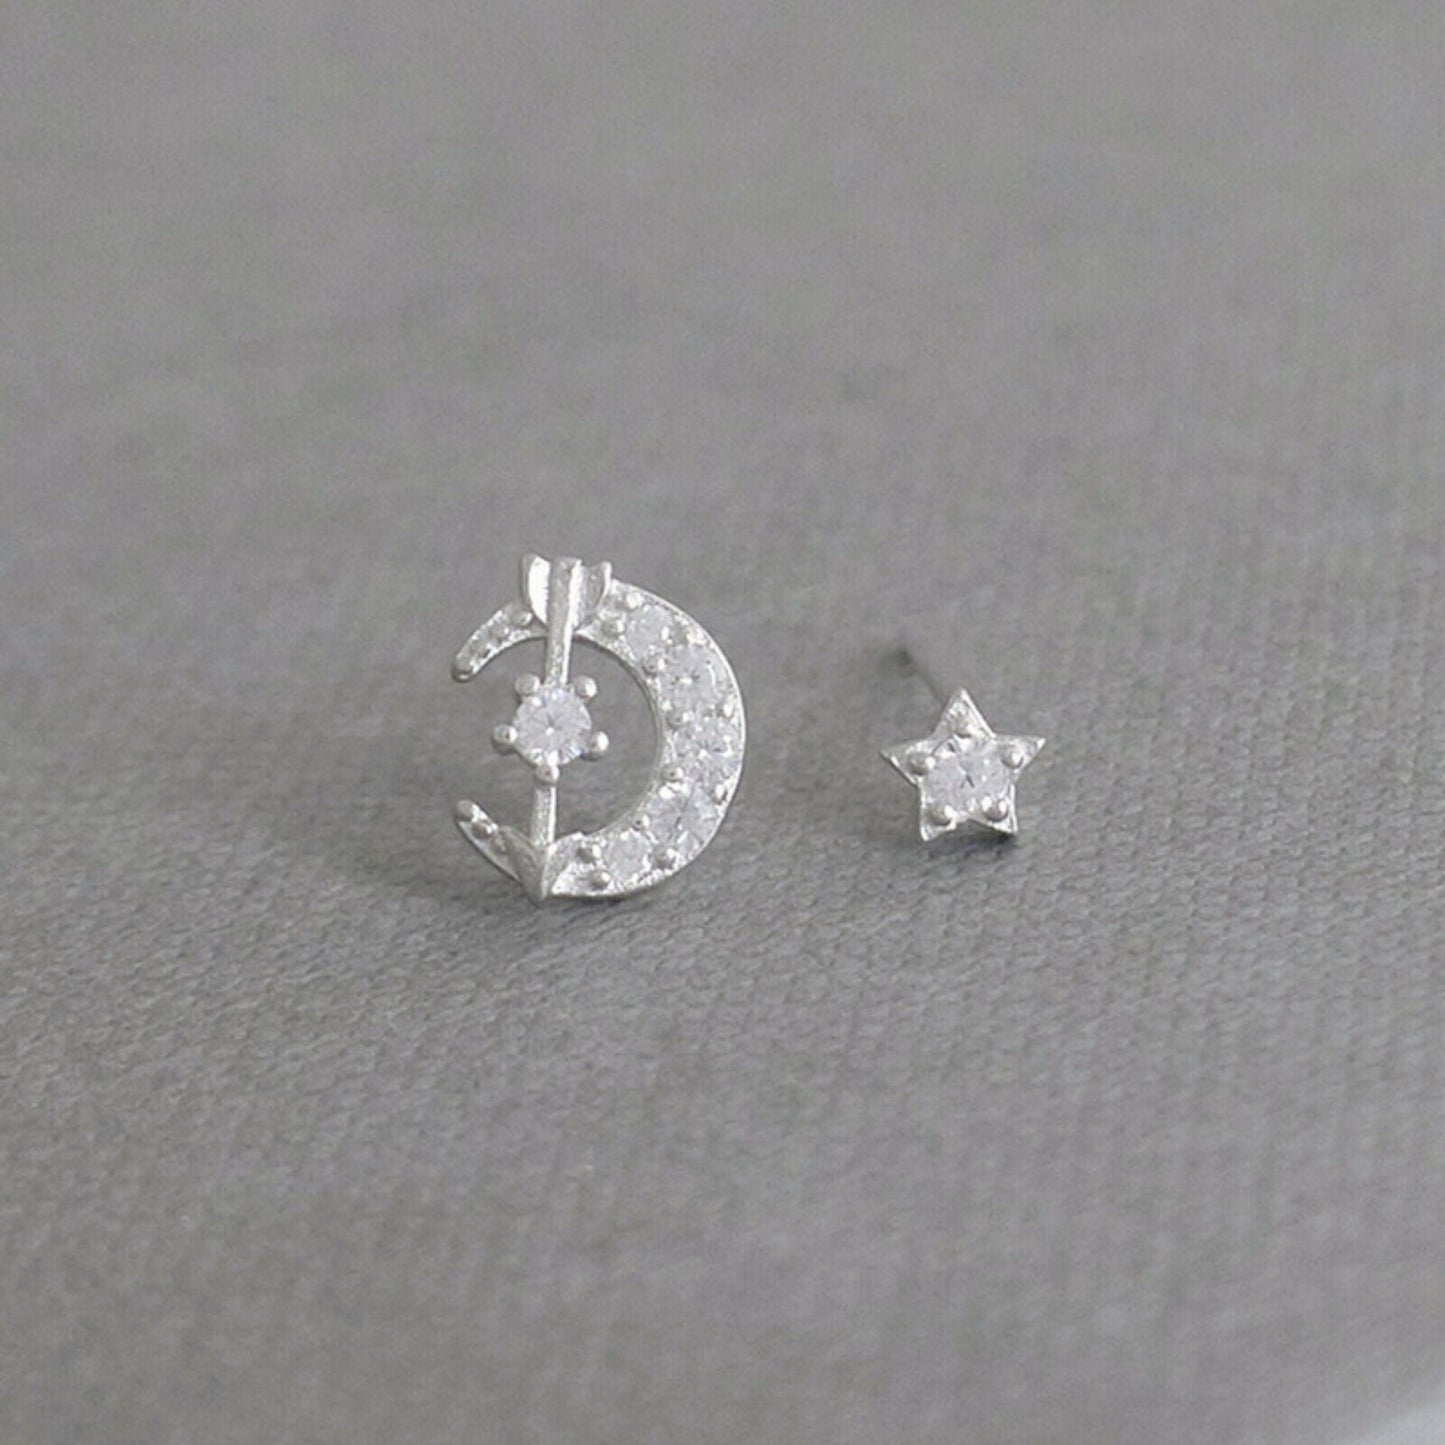 Sterling Silver Moon Star Love Arrow Stud Earrings with CZ Paving and Rhodium Plating